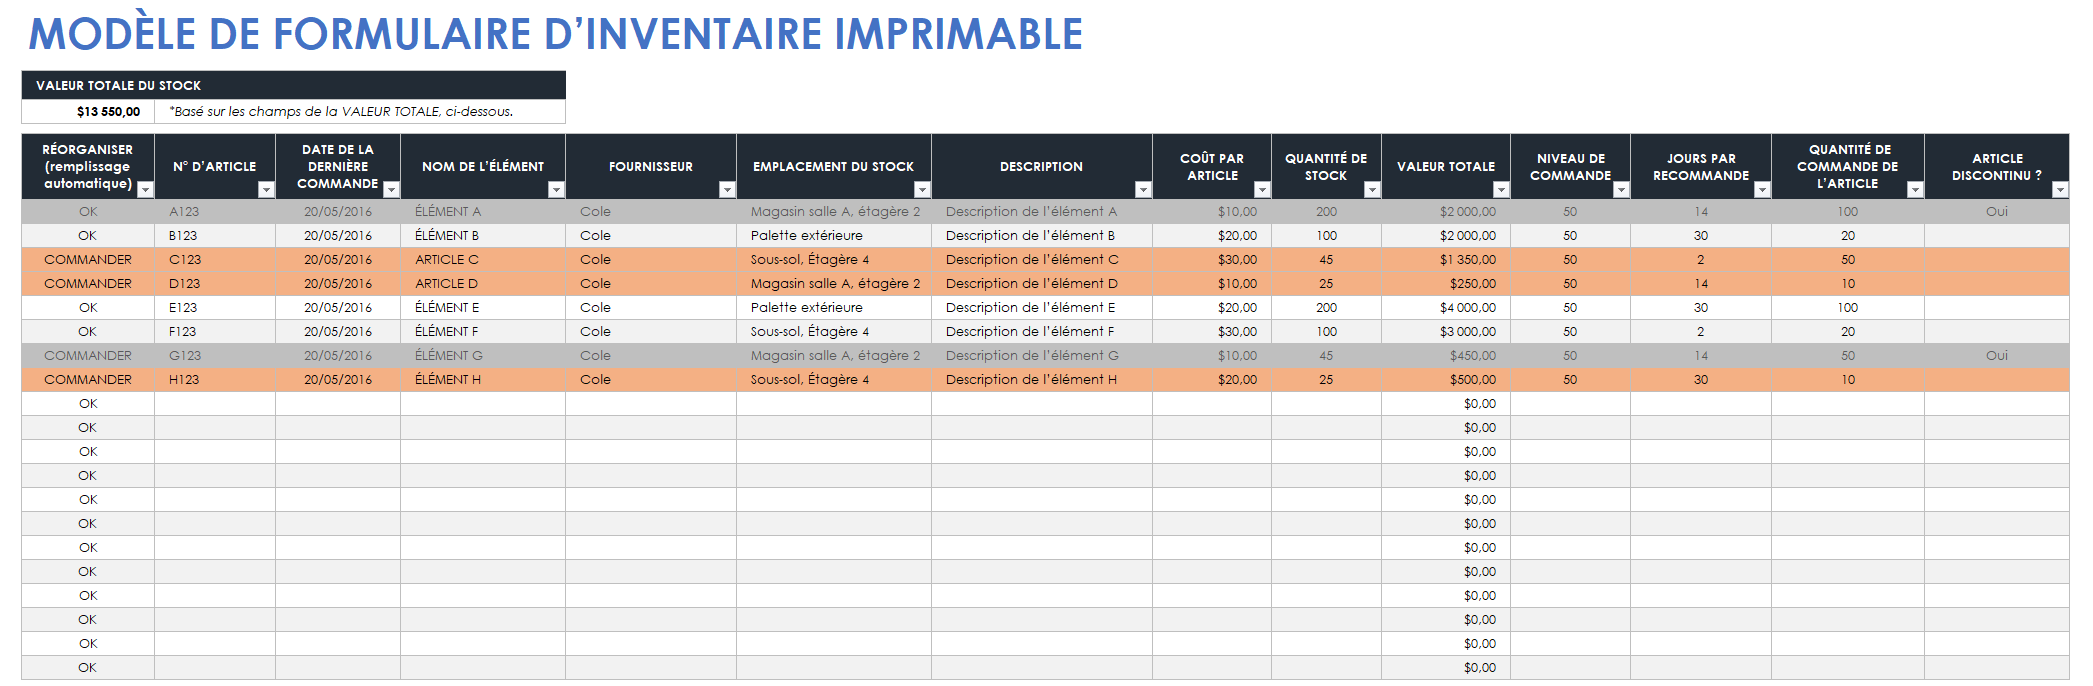 Formulaire d'inventaire imprimable